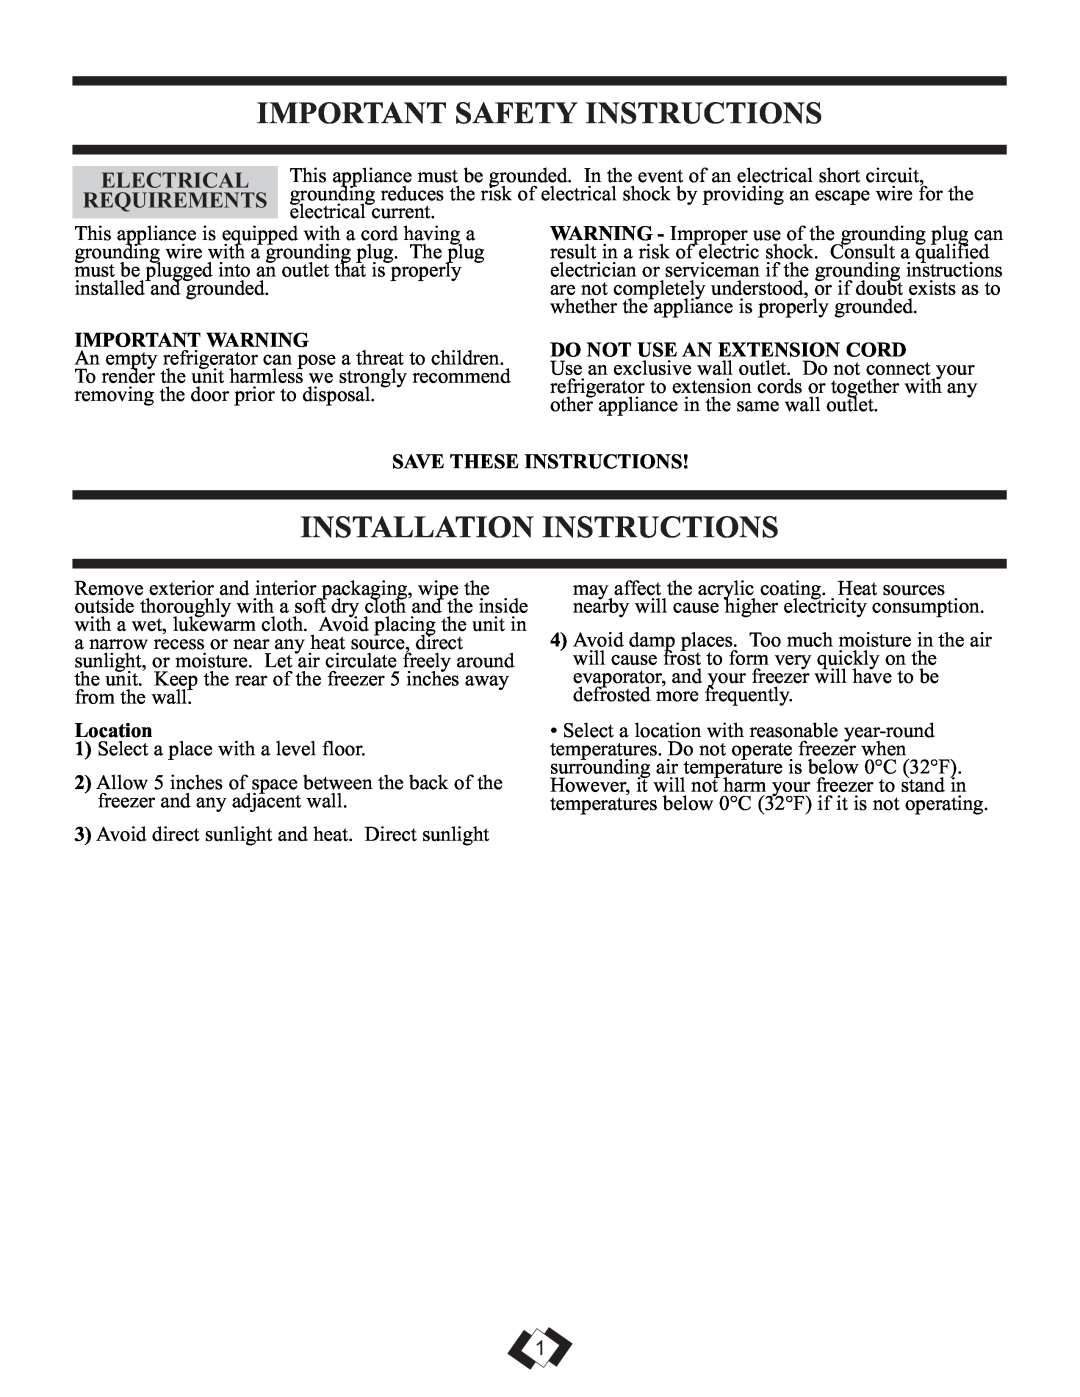 Danby DCFM102WSB Important Safety Instructions, Installation Instructions, Electrical, Requirements, Important Warning 